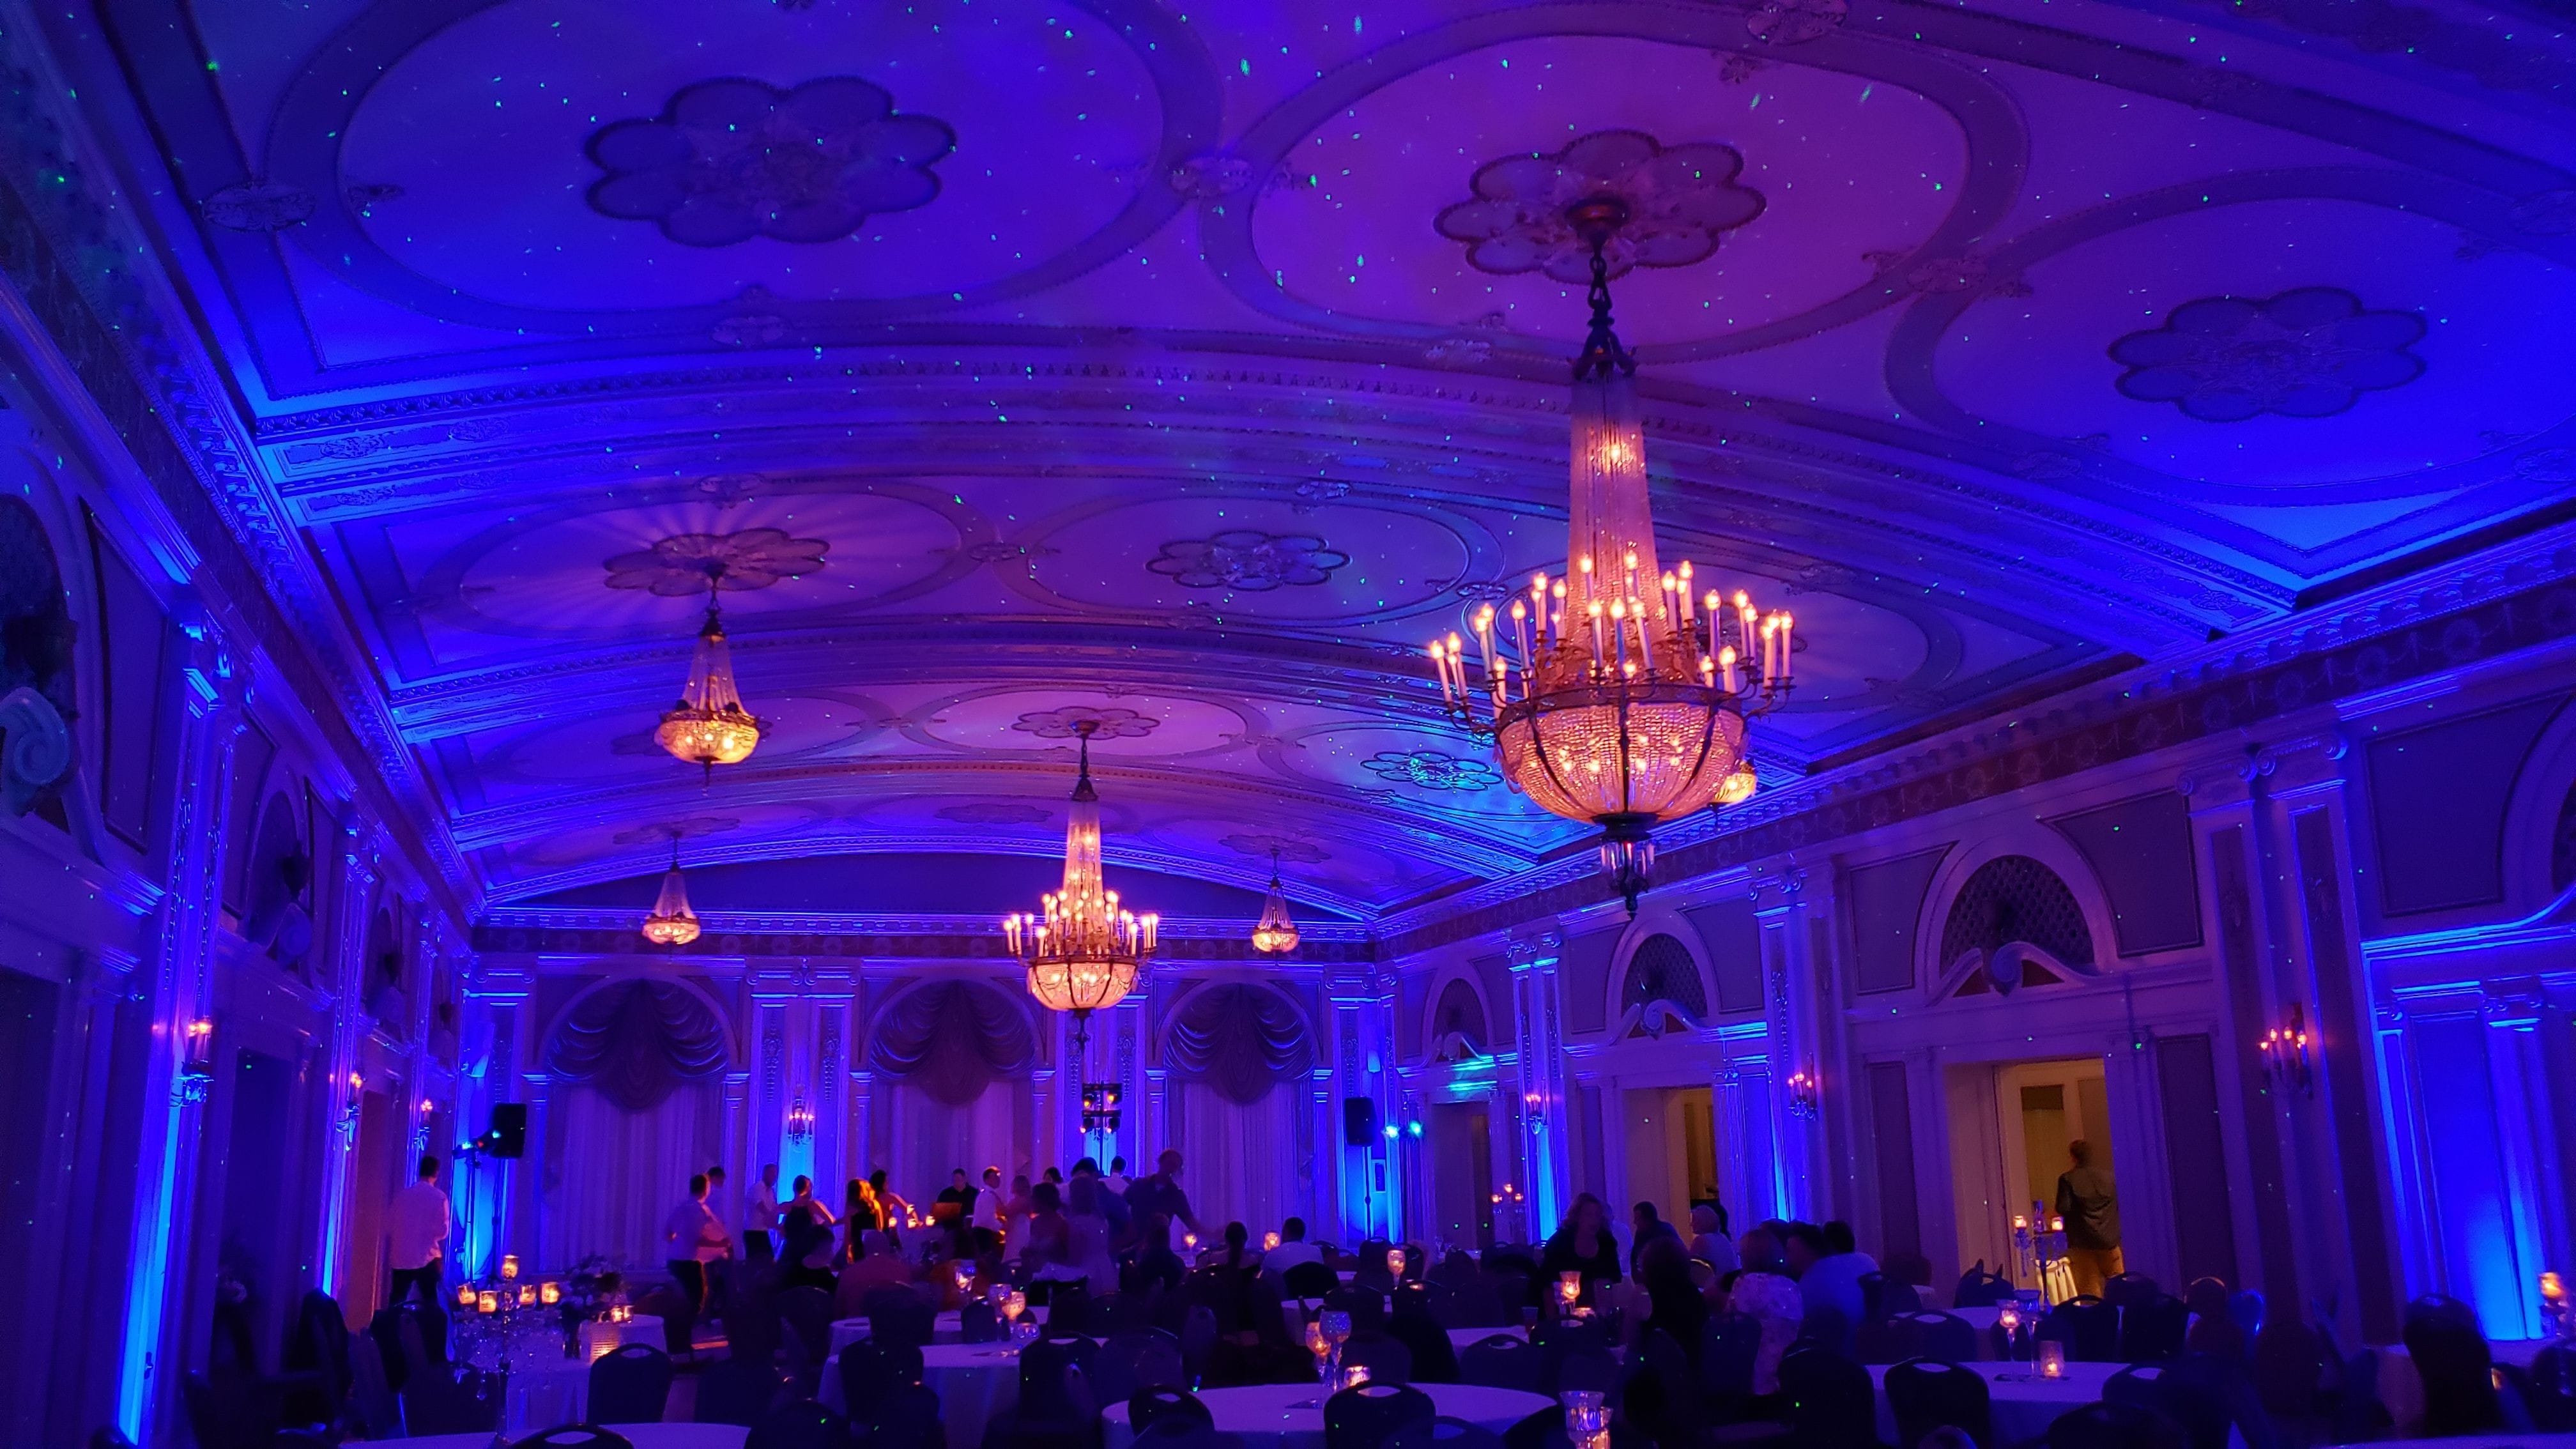 Wedding lighting at Greysolon Ballroom. Up lighting in blue with stars and Northern Lights.